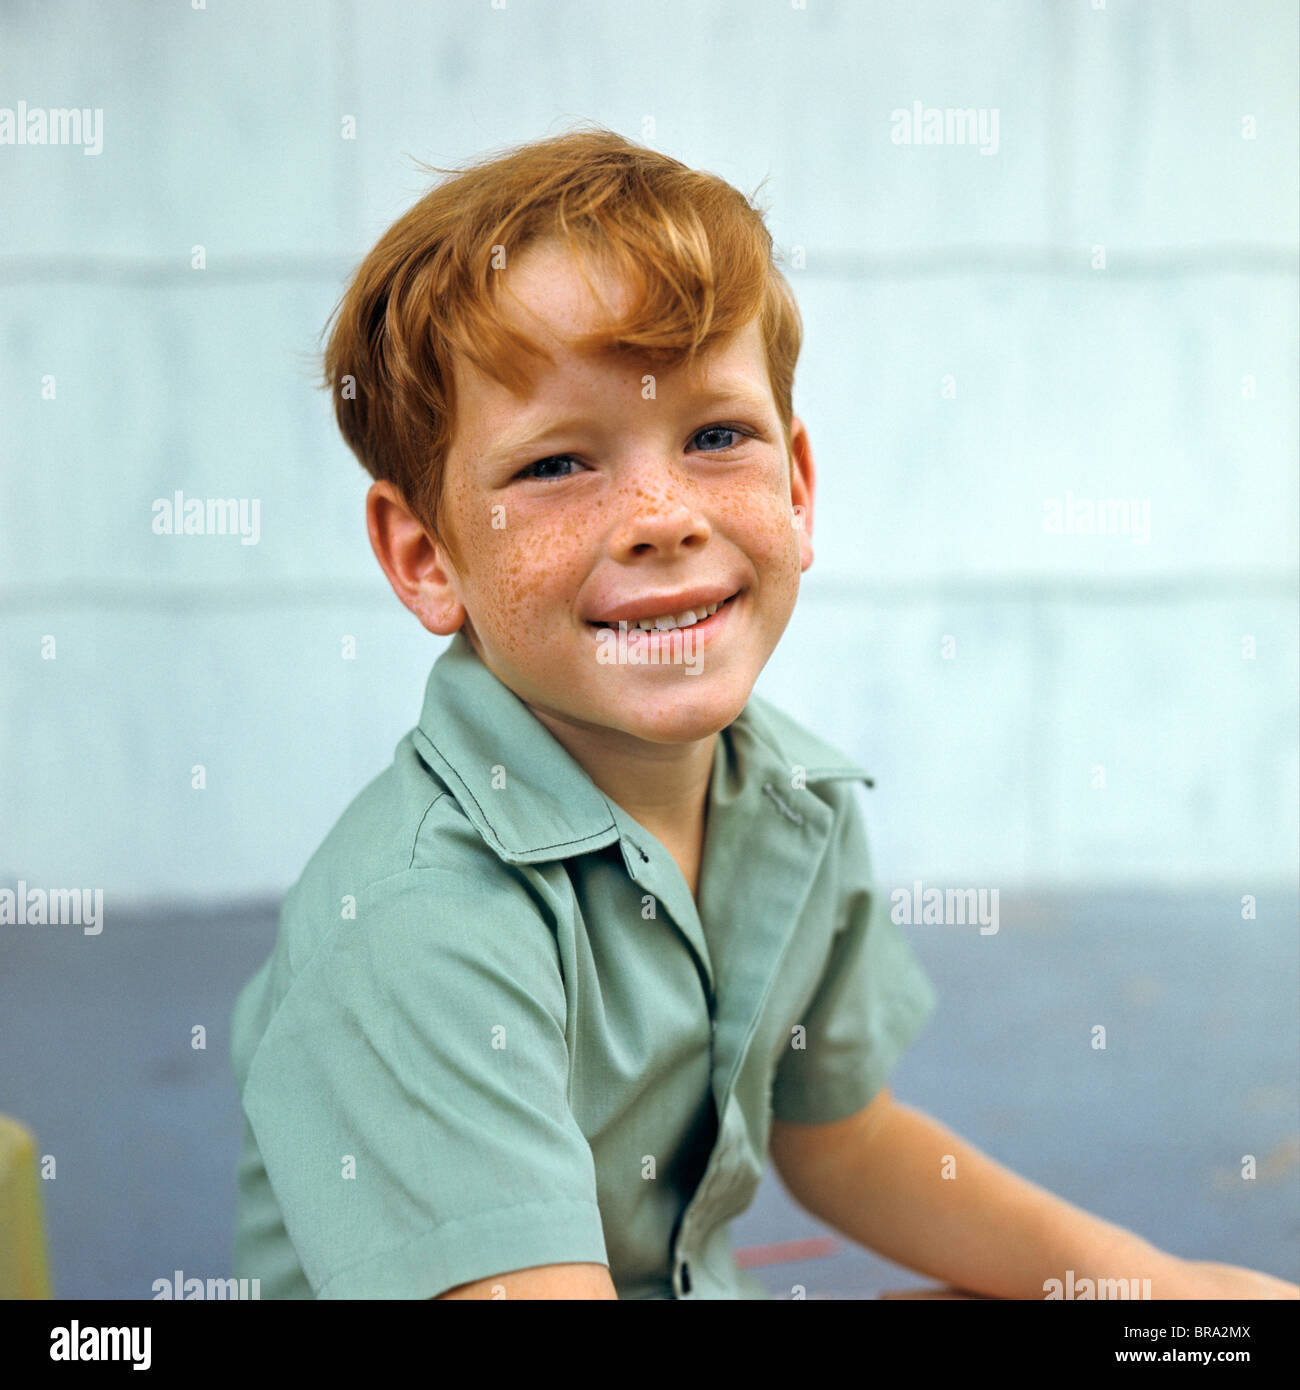 1970 1970s RETRO PORTRAIT OF SMILING BOY RED HAIR FRECKLES Stock Photo